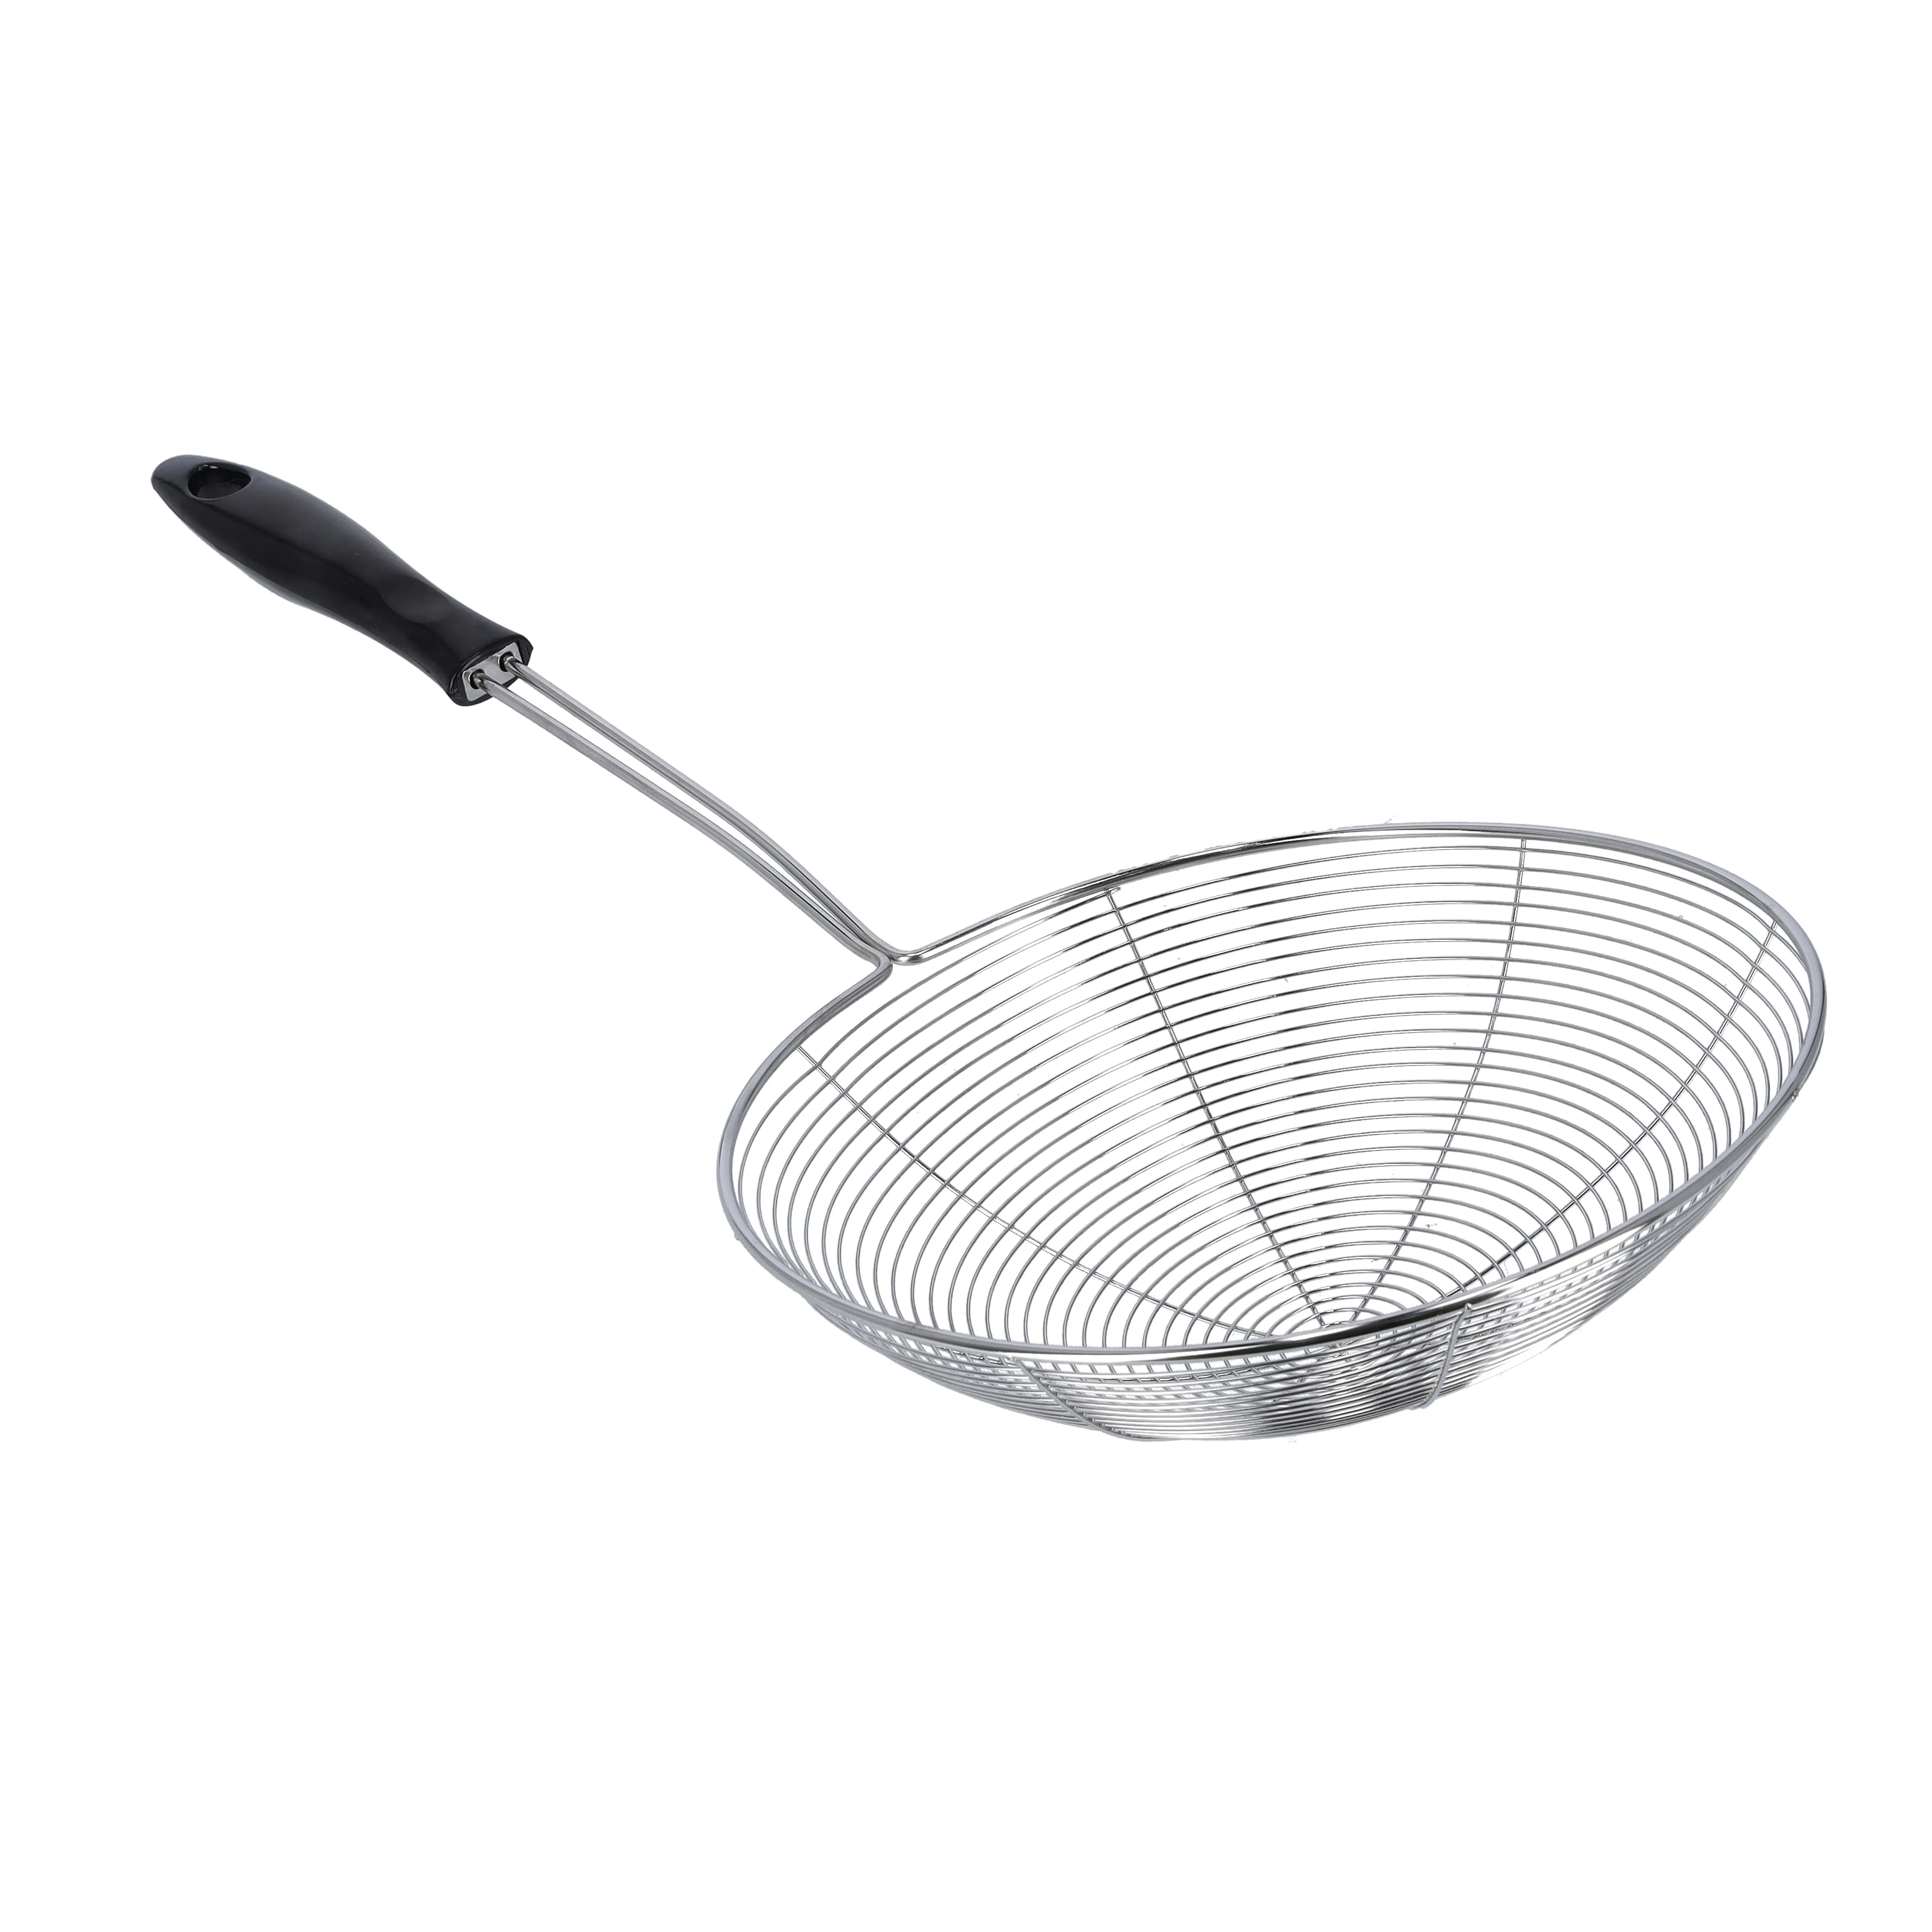 Royalford  19.5 Cm Stainless Steel Skimmer - Spider Strainer Skimmer Strainer Ladle Stainless Steel Wire Skimmer Spoon with Handle for Kitchen Frying Food, Pasta, Spaghetti, Noodle & More